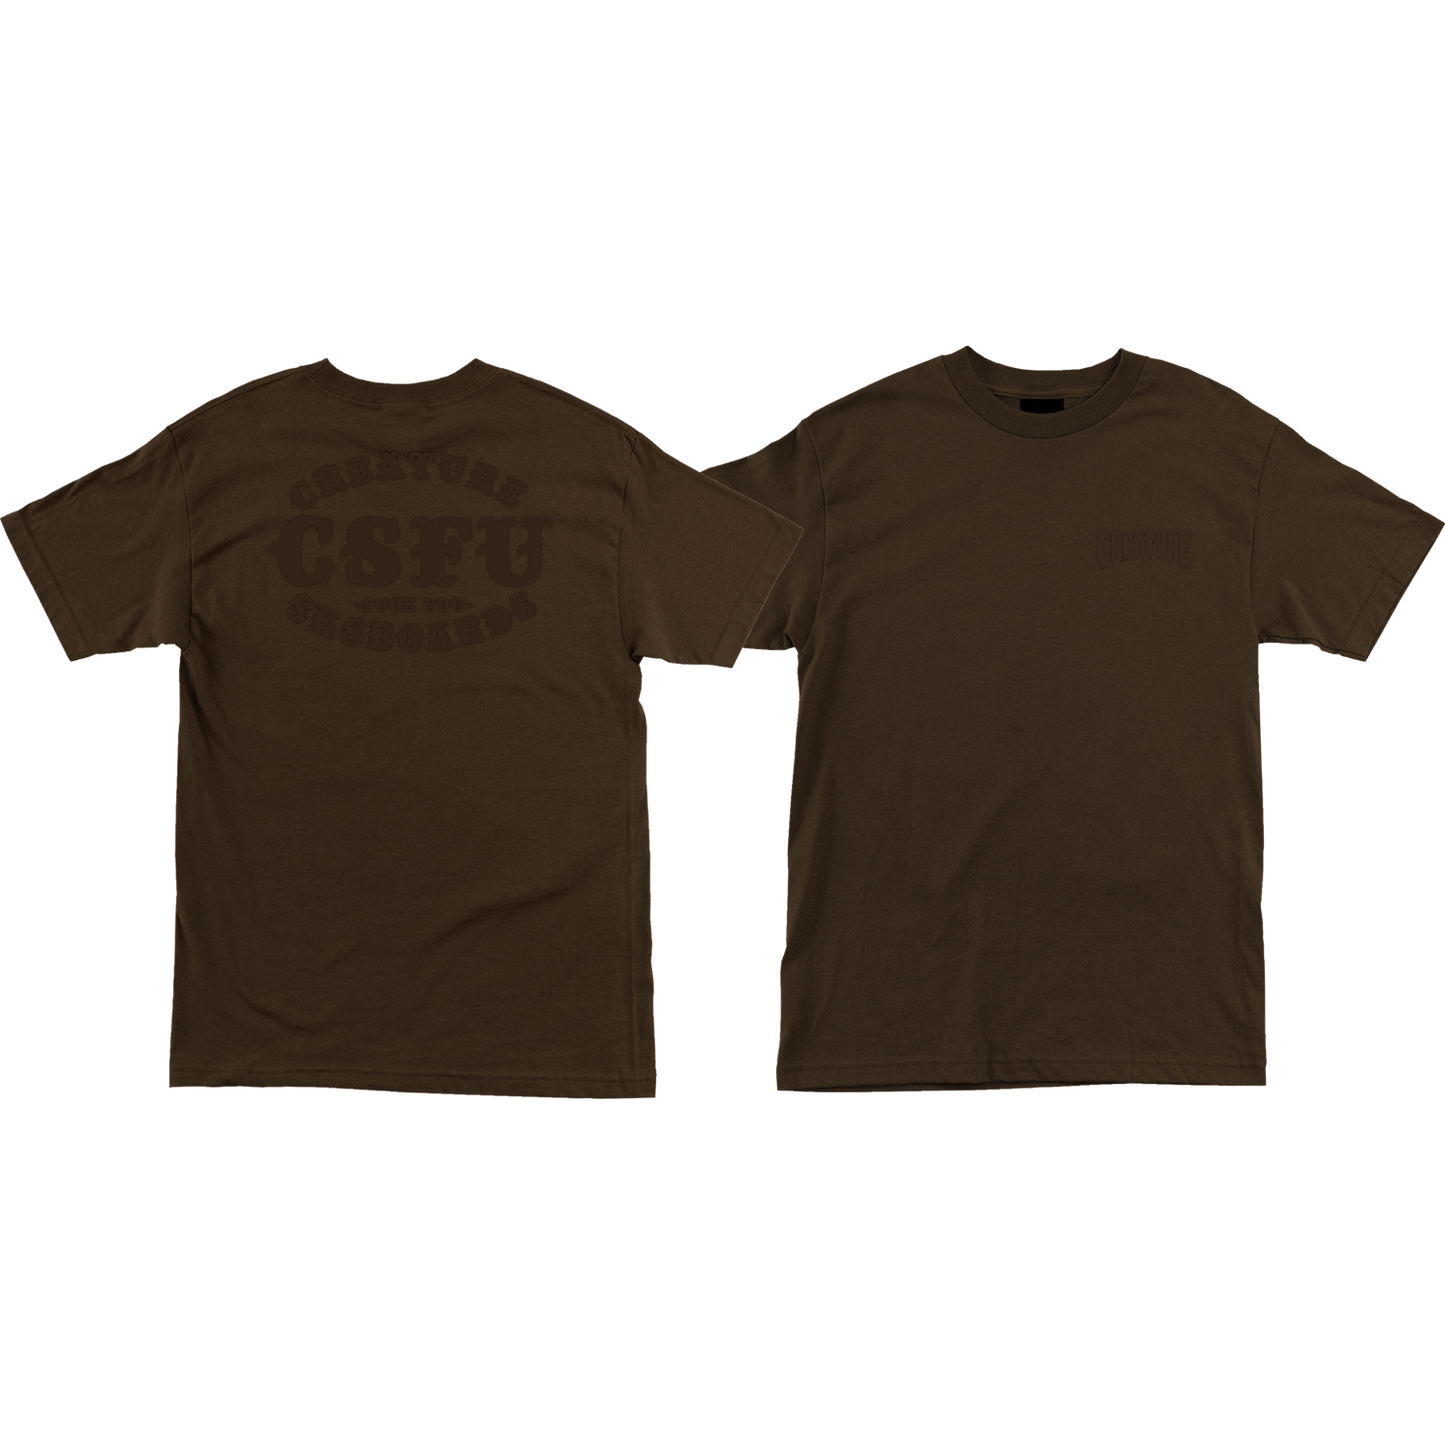 Creature Club Support Short Sleeve T-Shirt - Size: SMALL Dark Chocolate